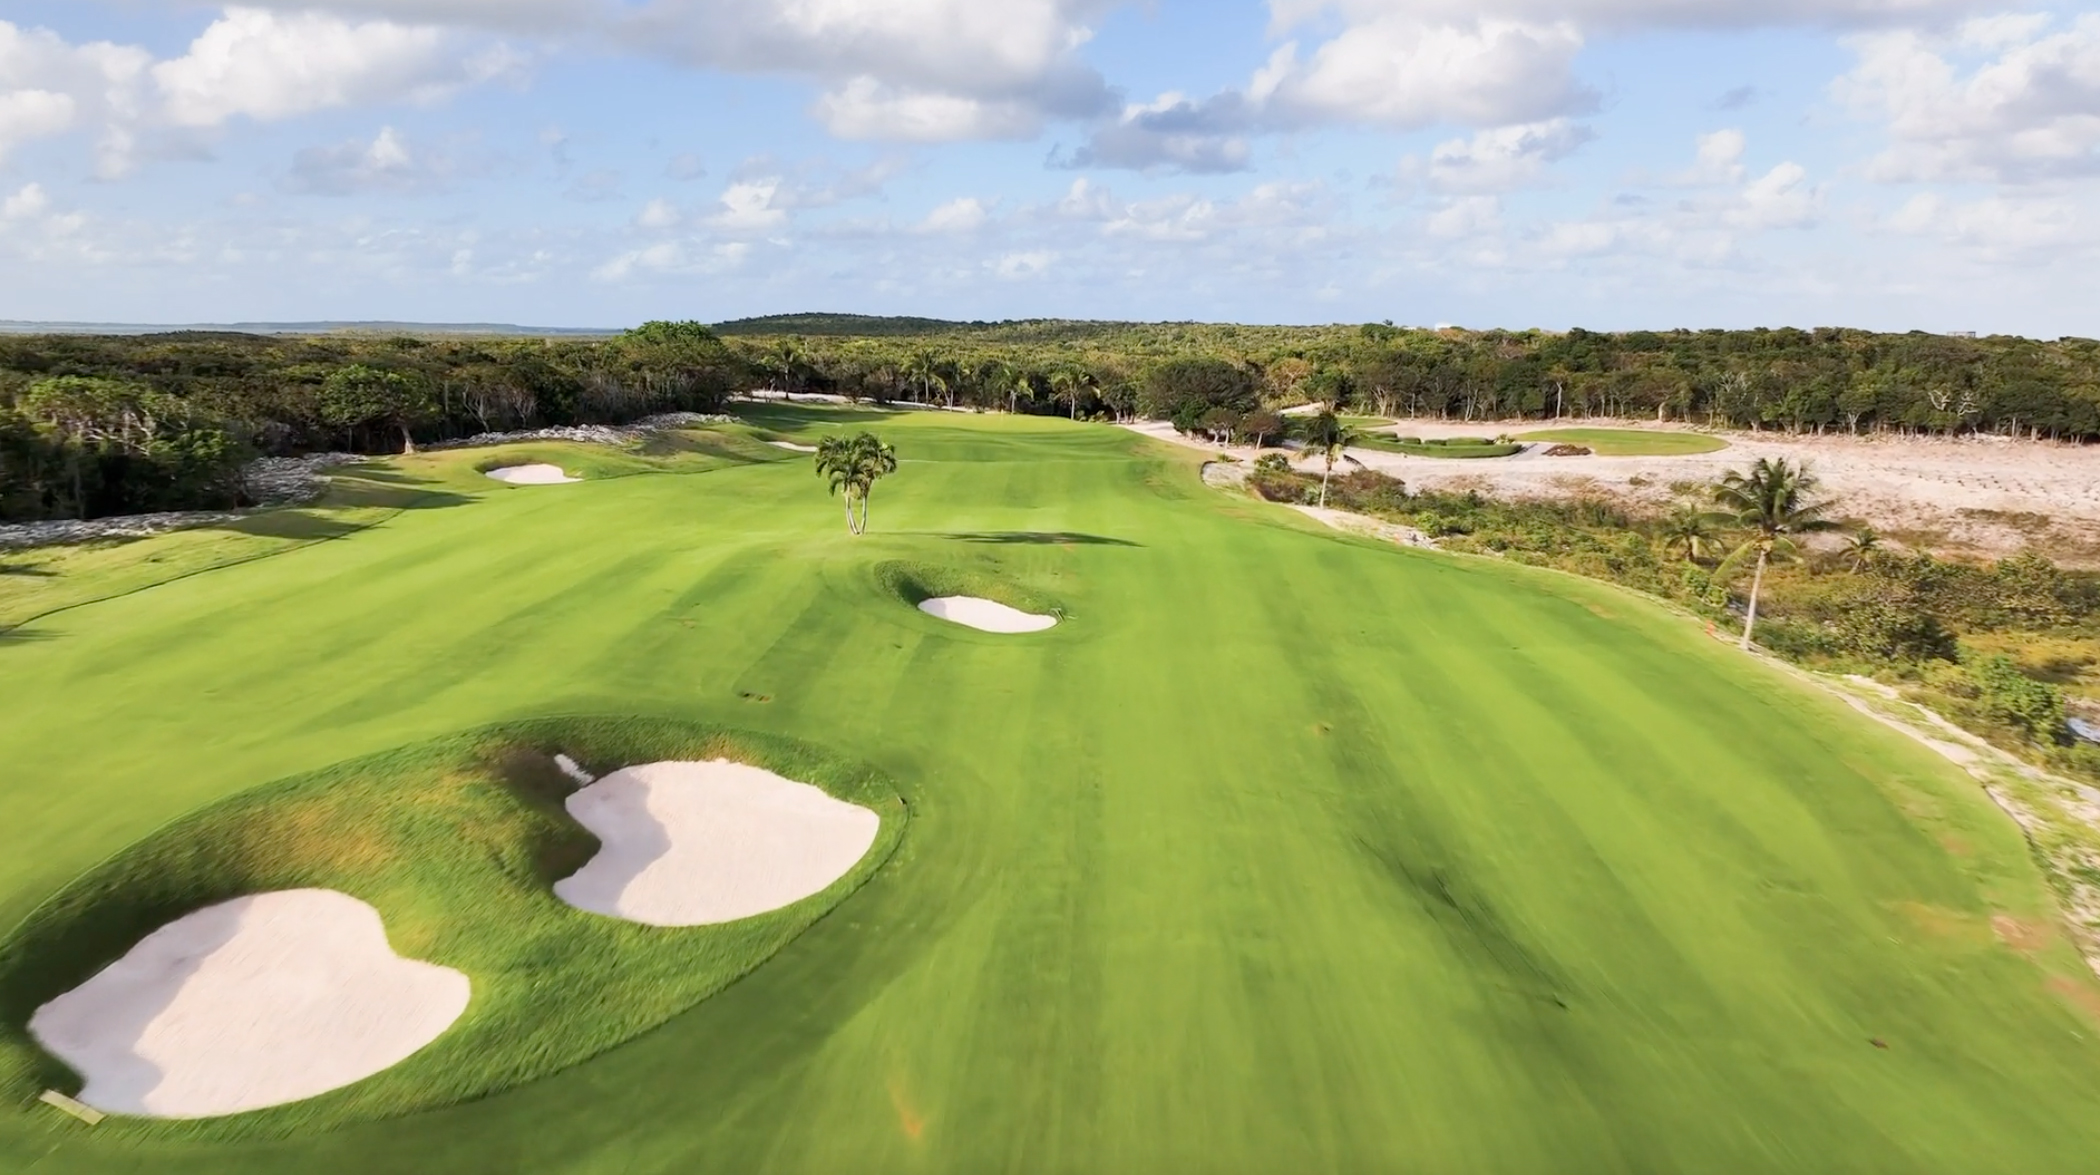 Aerial shot of Hole 15 from The Abaco Club golf course